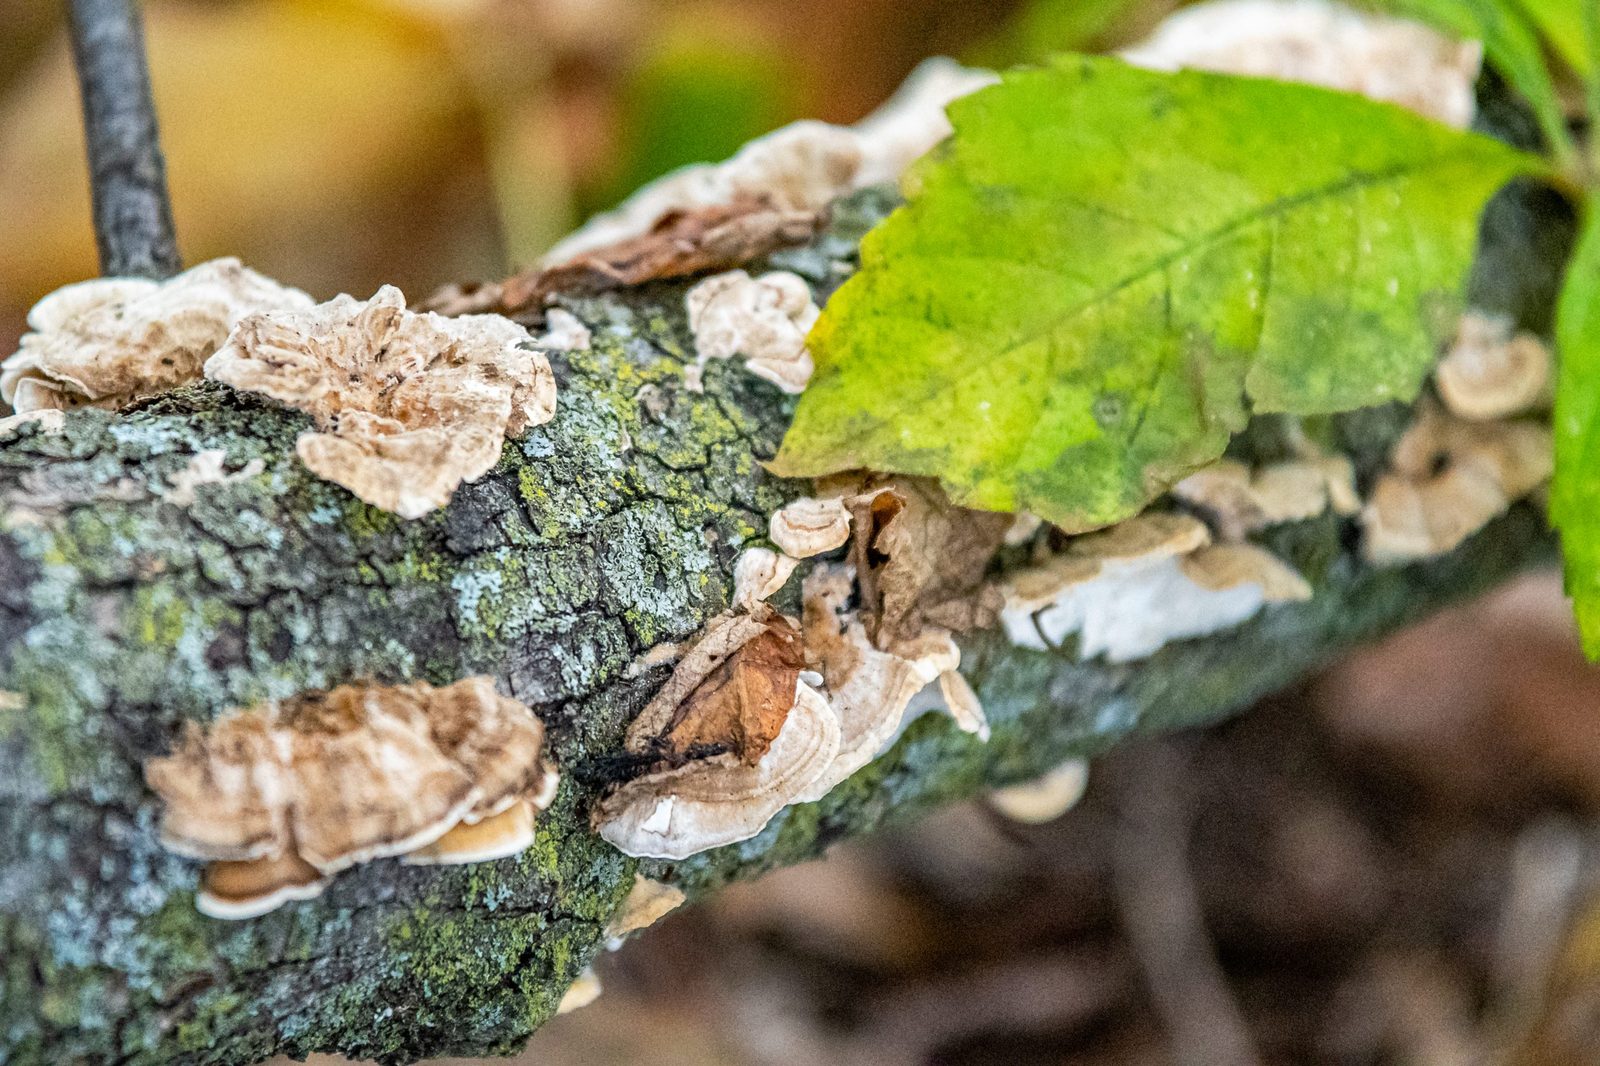 Close-up of a fallen tree trunk with growth on it